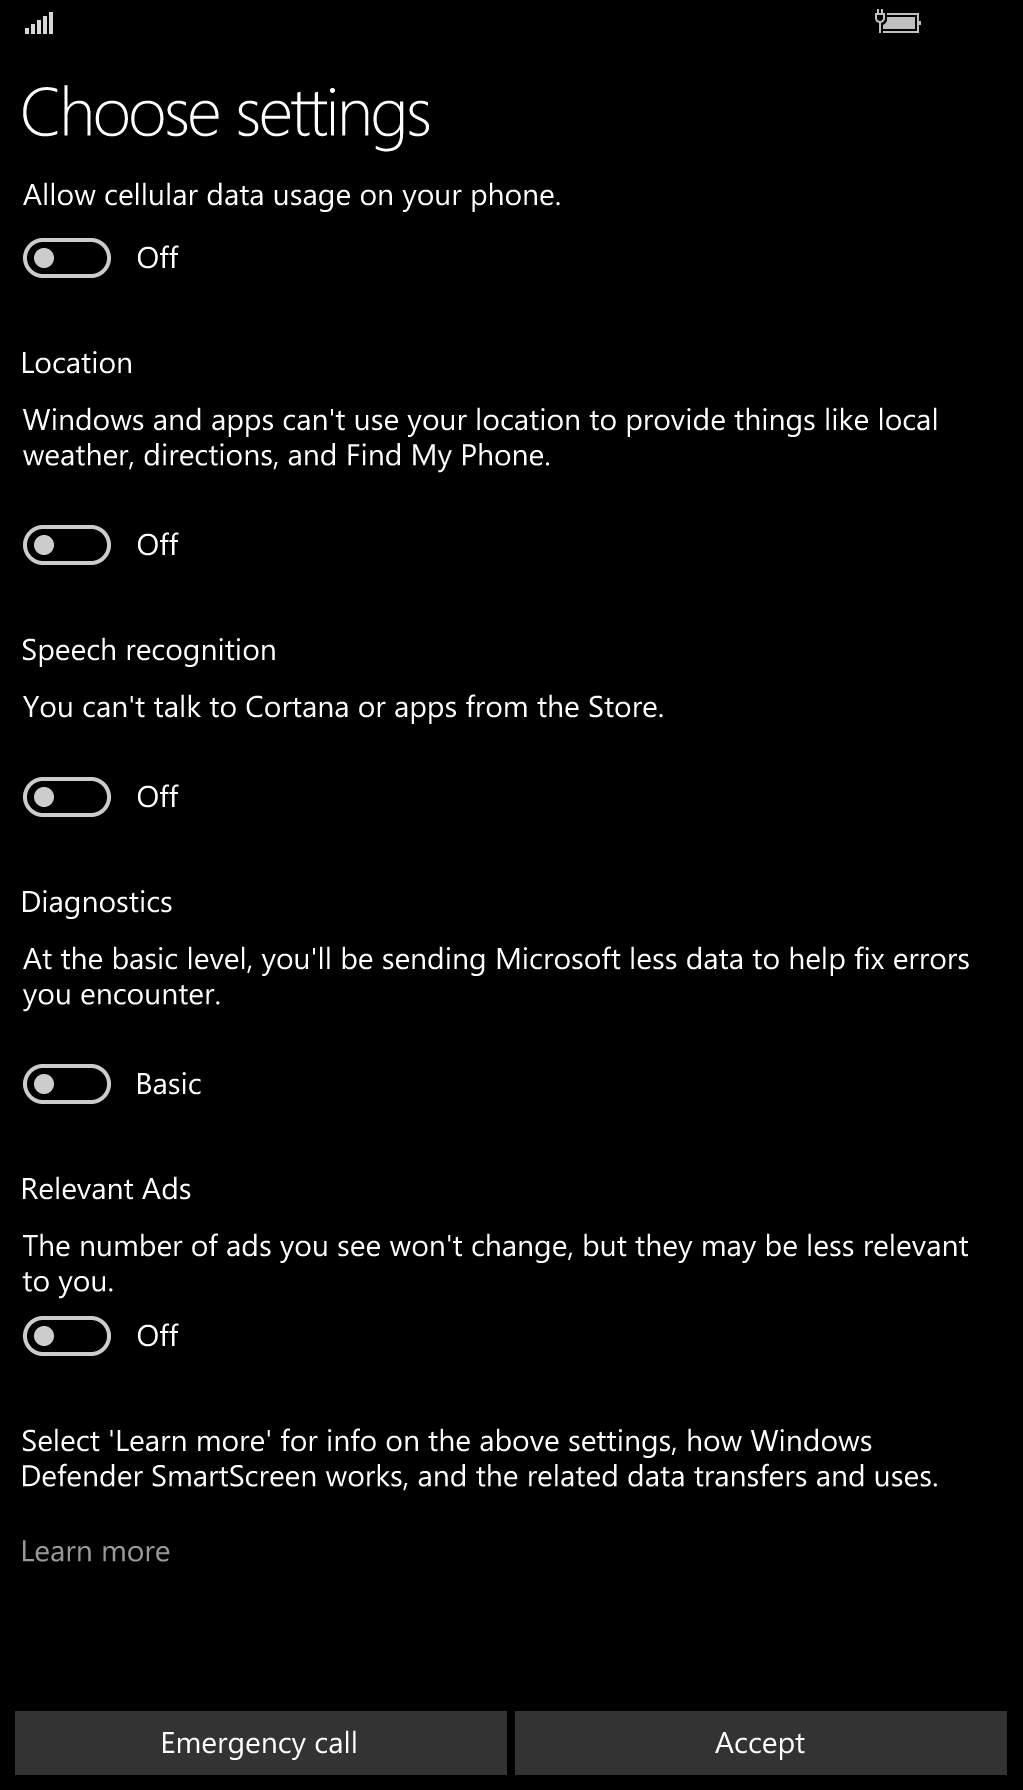 New privacy settings screen for Windows 10 Mobile customers in the Windows 10 Creators Update. 